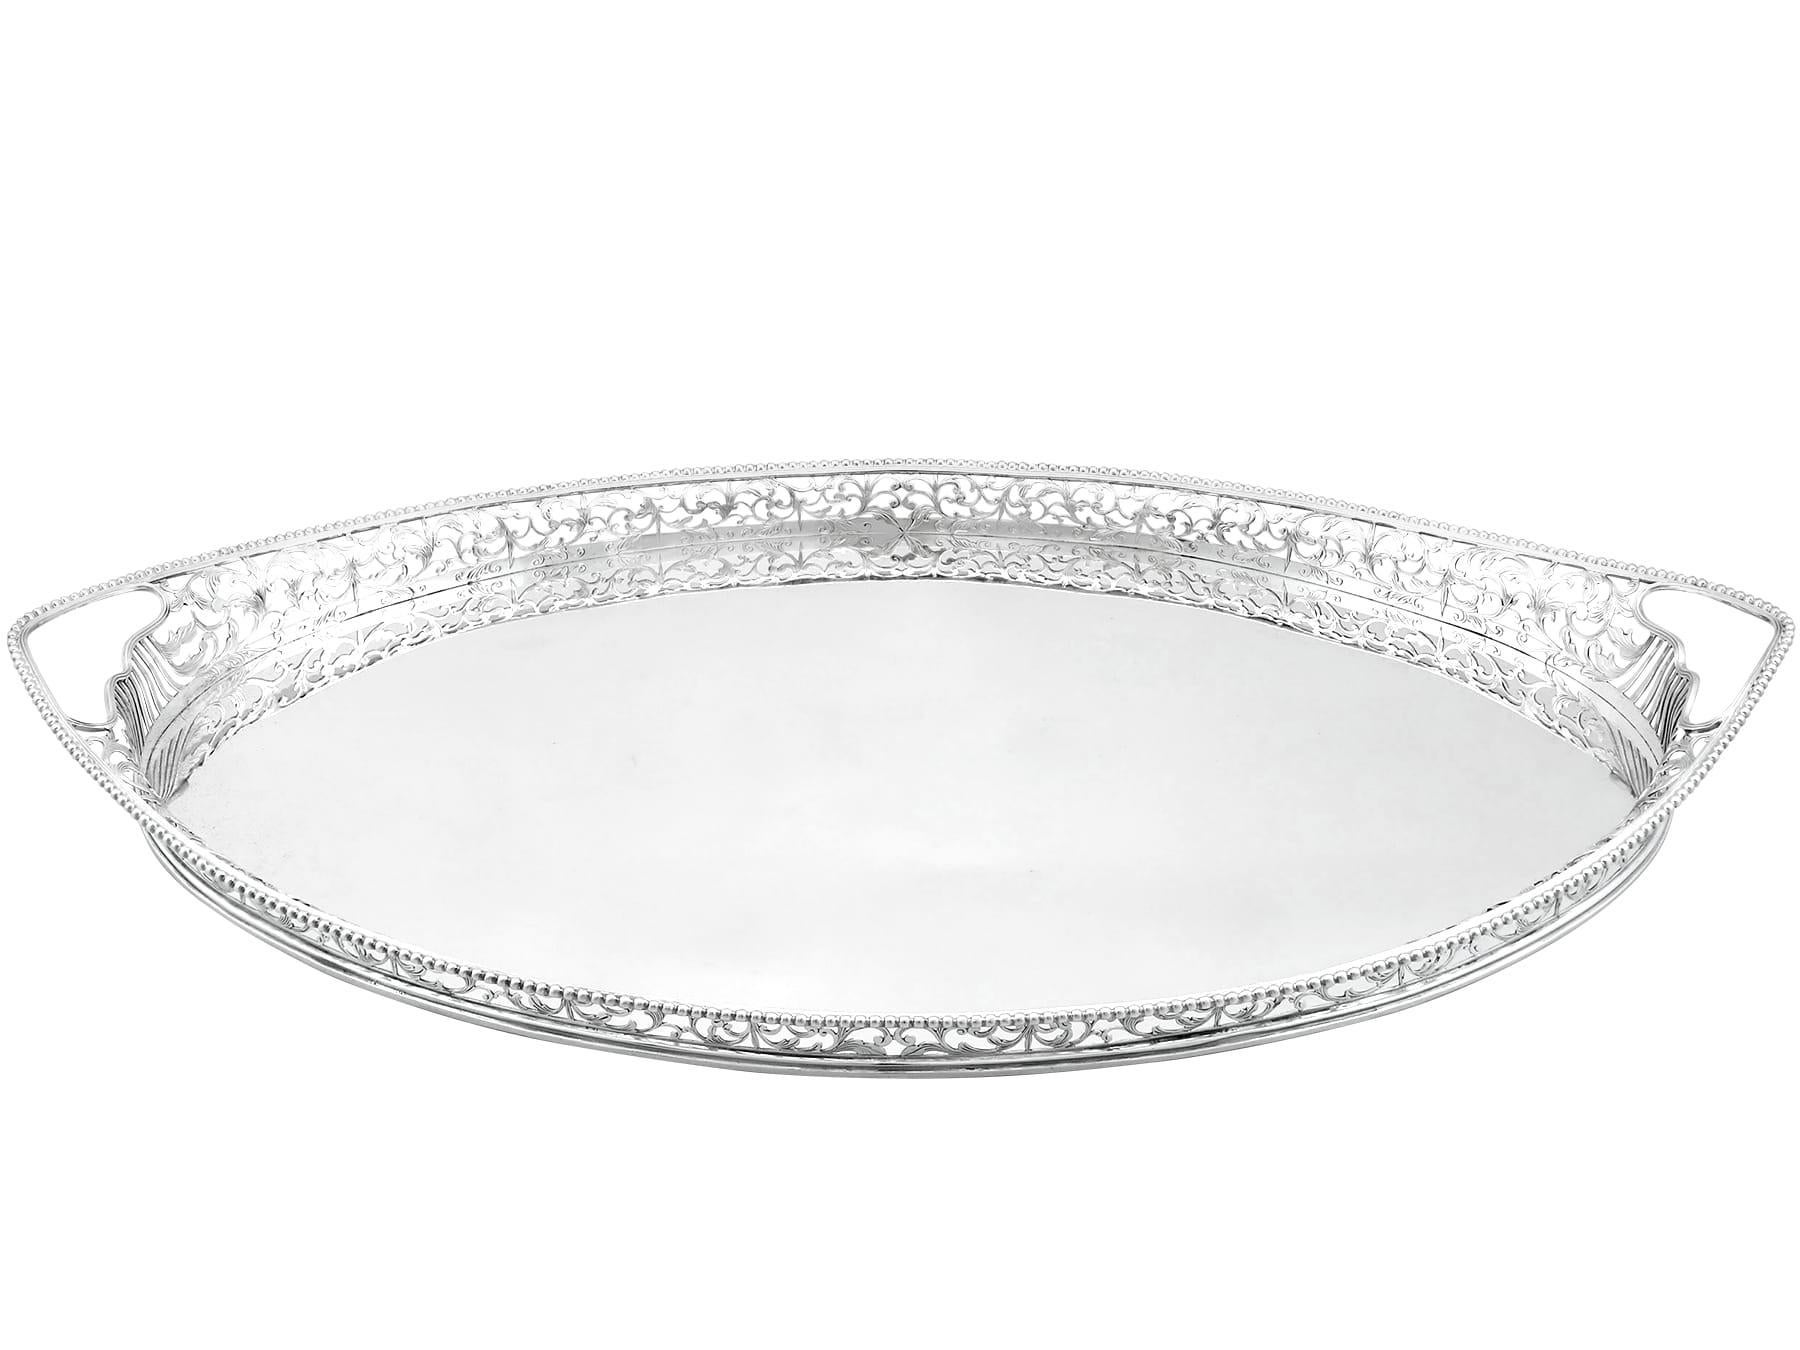 An exceptional, fine and impressive antique Dutch silver gallery tray; an addition to our dining silverware collection.

This exceptional antique Dutch silver tray has a plain oval form.

The surface of this antique tray is plain and